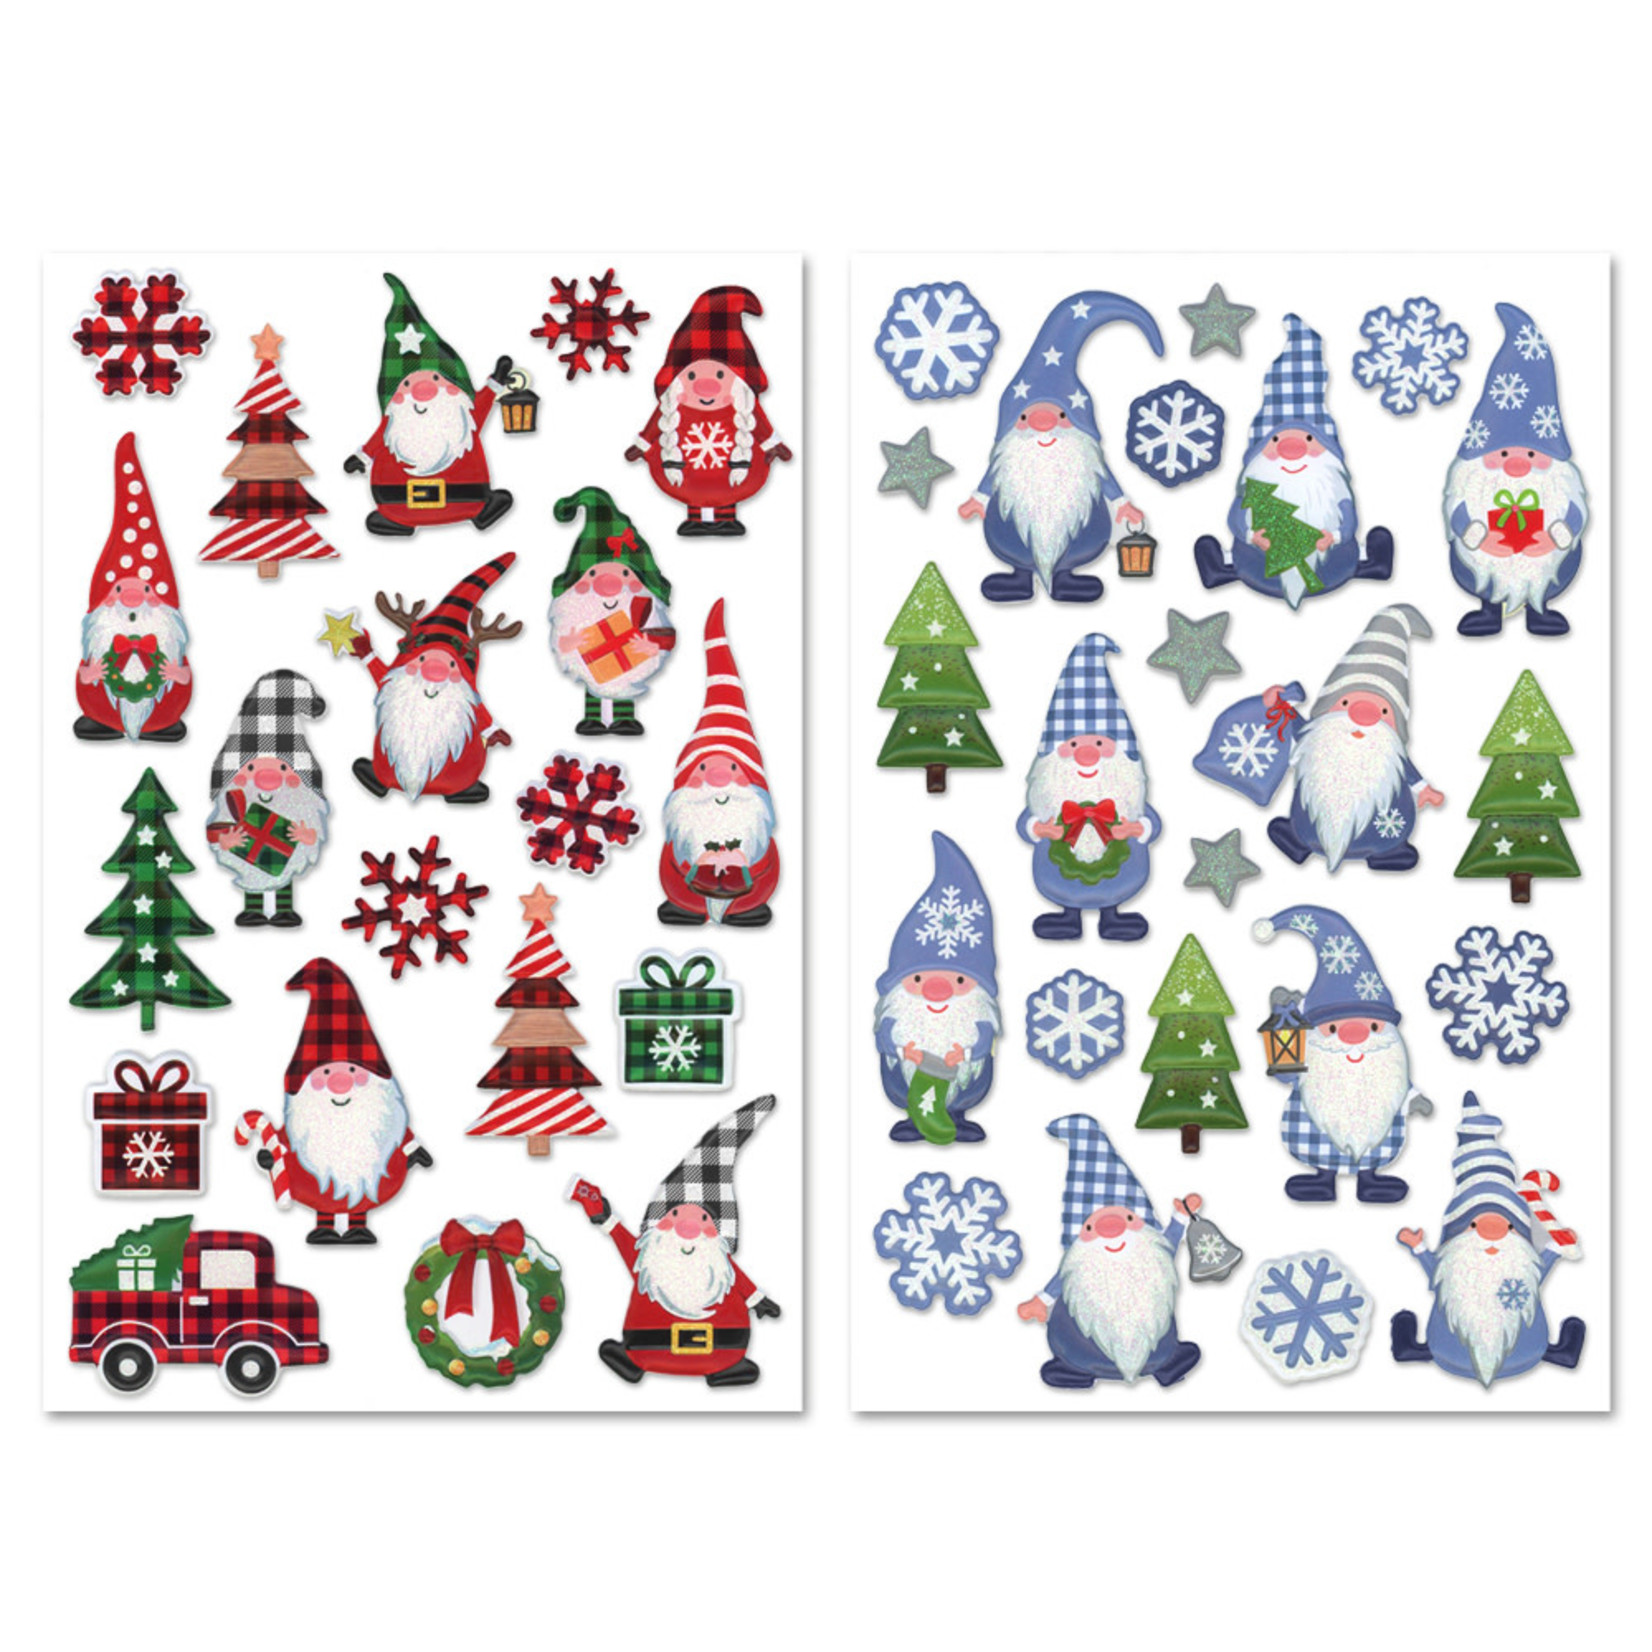 HOLIDAY STICKERS: 5.5INX8.25IN 3D POP-UP GLITTERA) GNOME MEDLEY